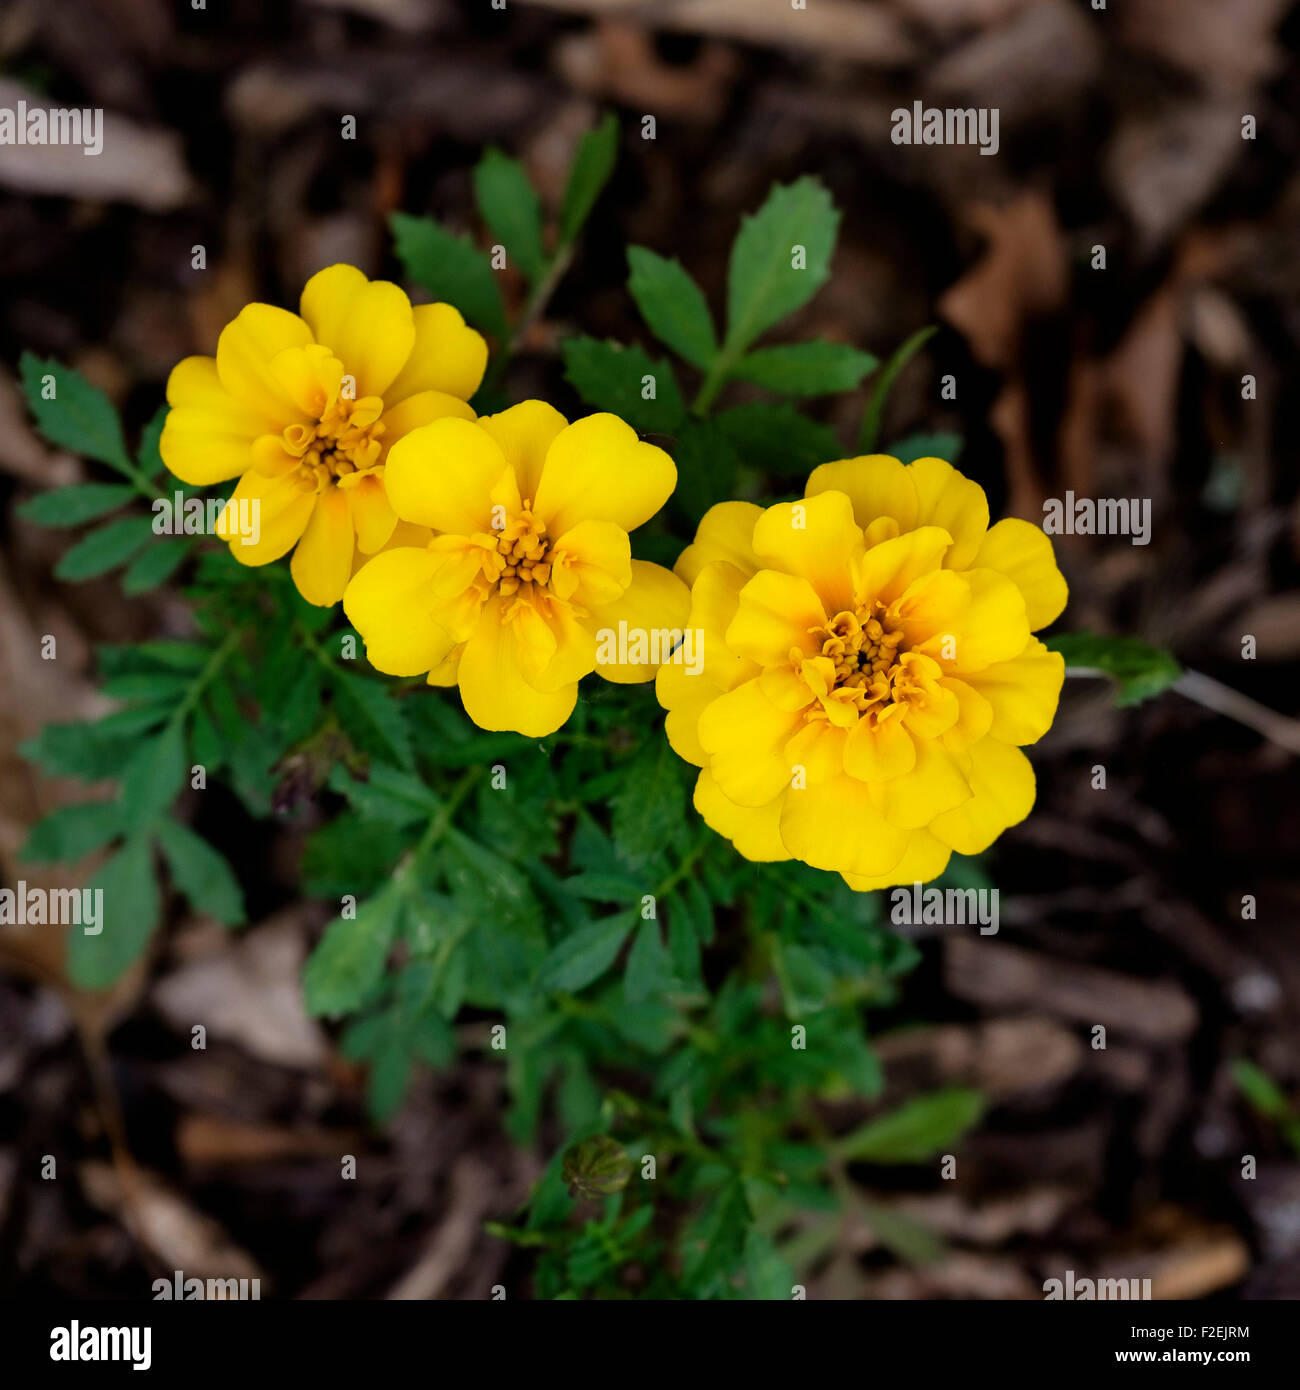 Three bright yellow French marigold flowers in a garden bed. Oklahoma, USA. Stock Photo